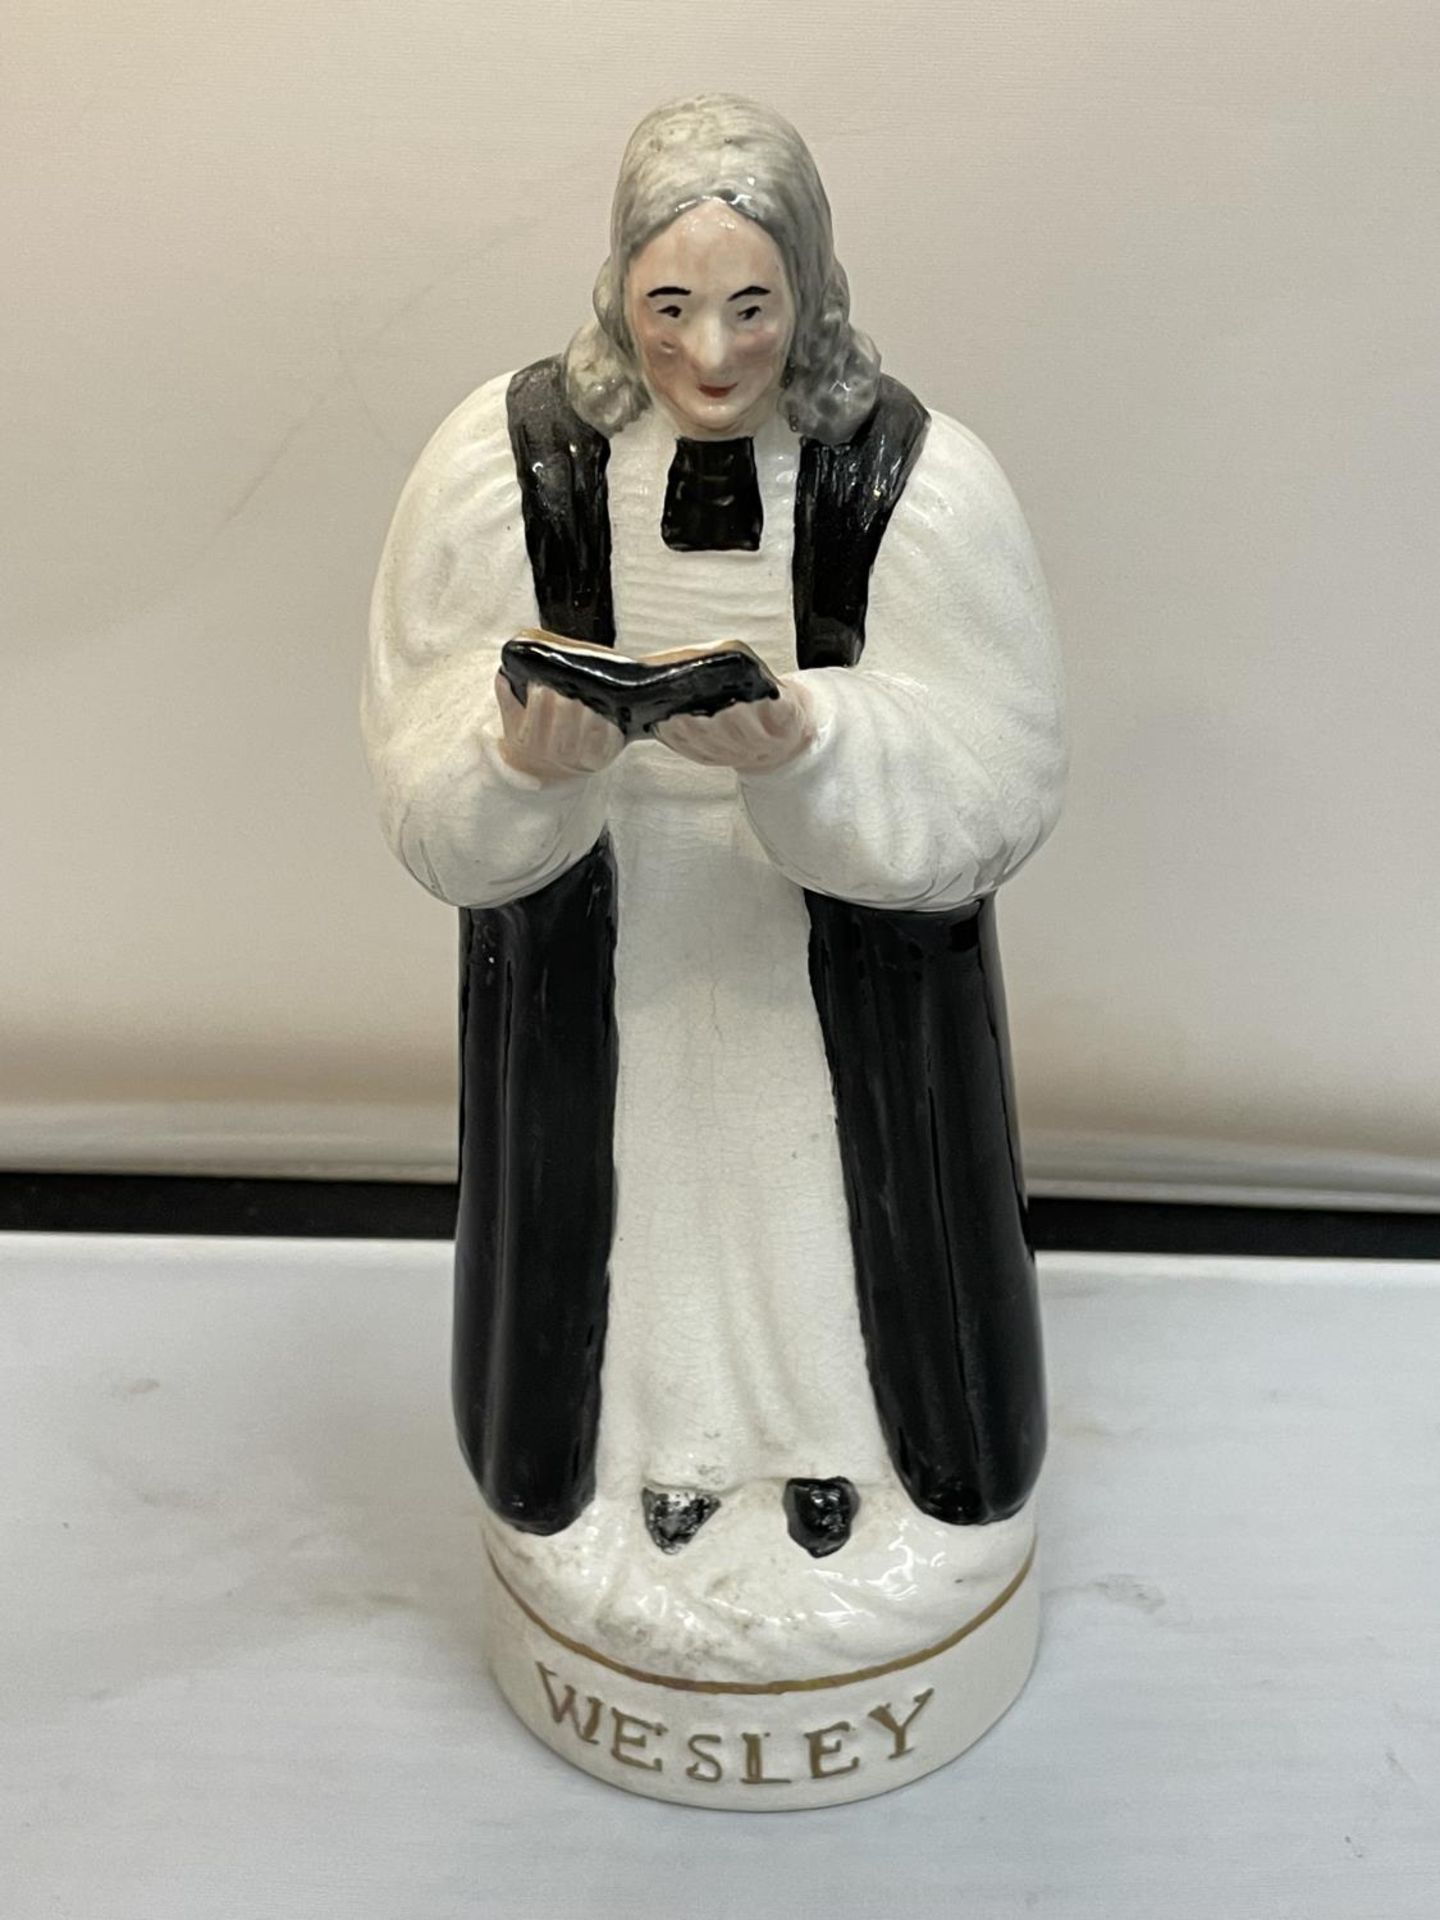 A STAFFORDSHIRE FIGURE OF JOHN WESLEY - Image 2 of 8